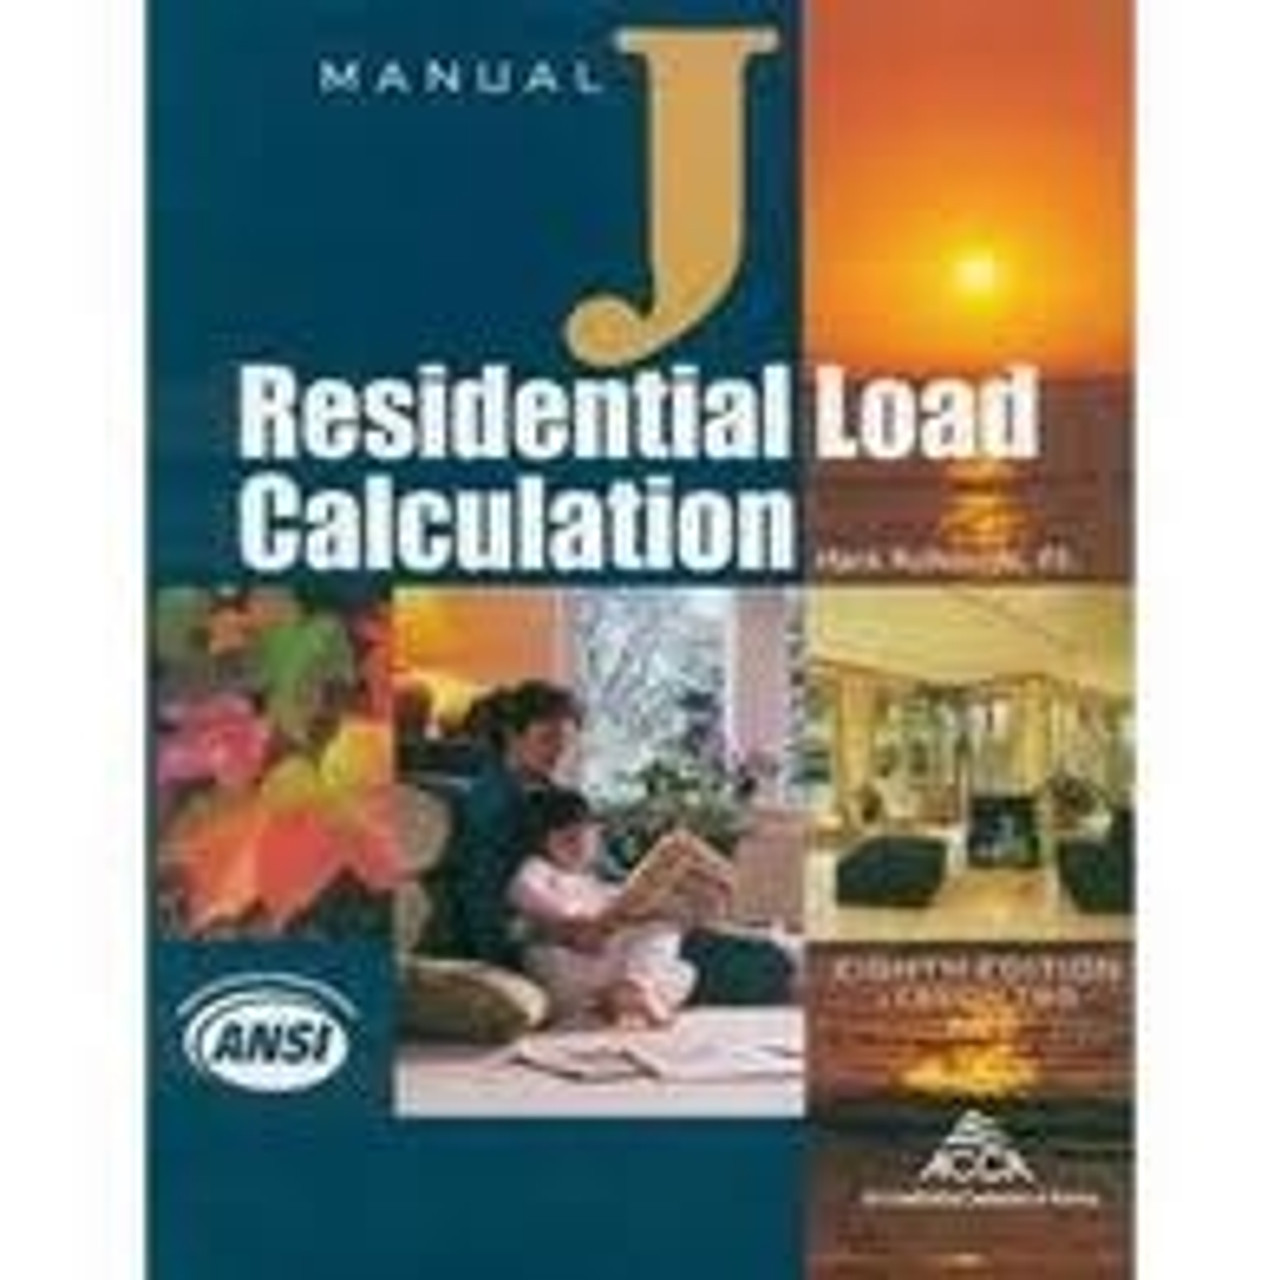 Manual J - Residential Load Calculation, 8th Edition - Full Version